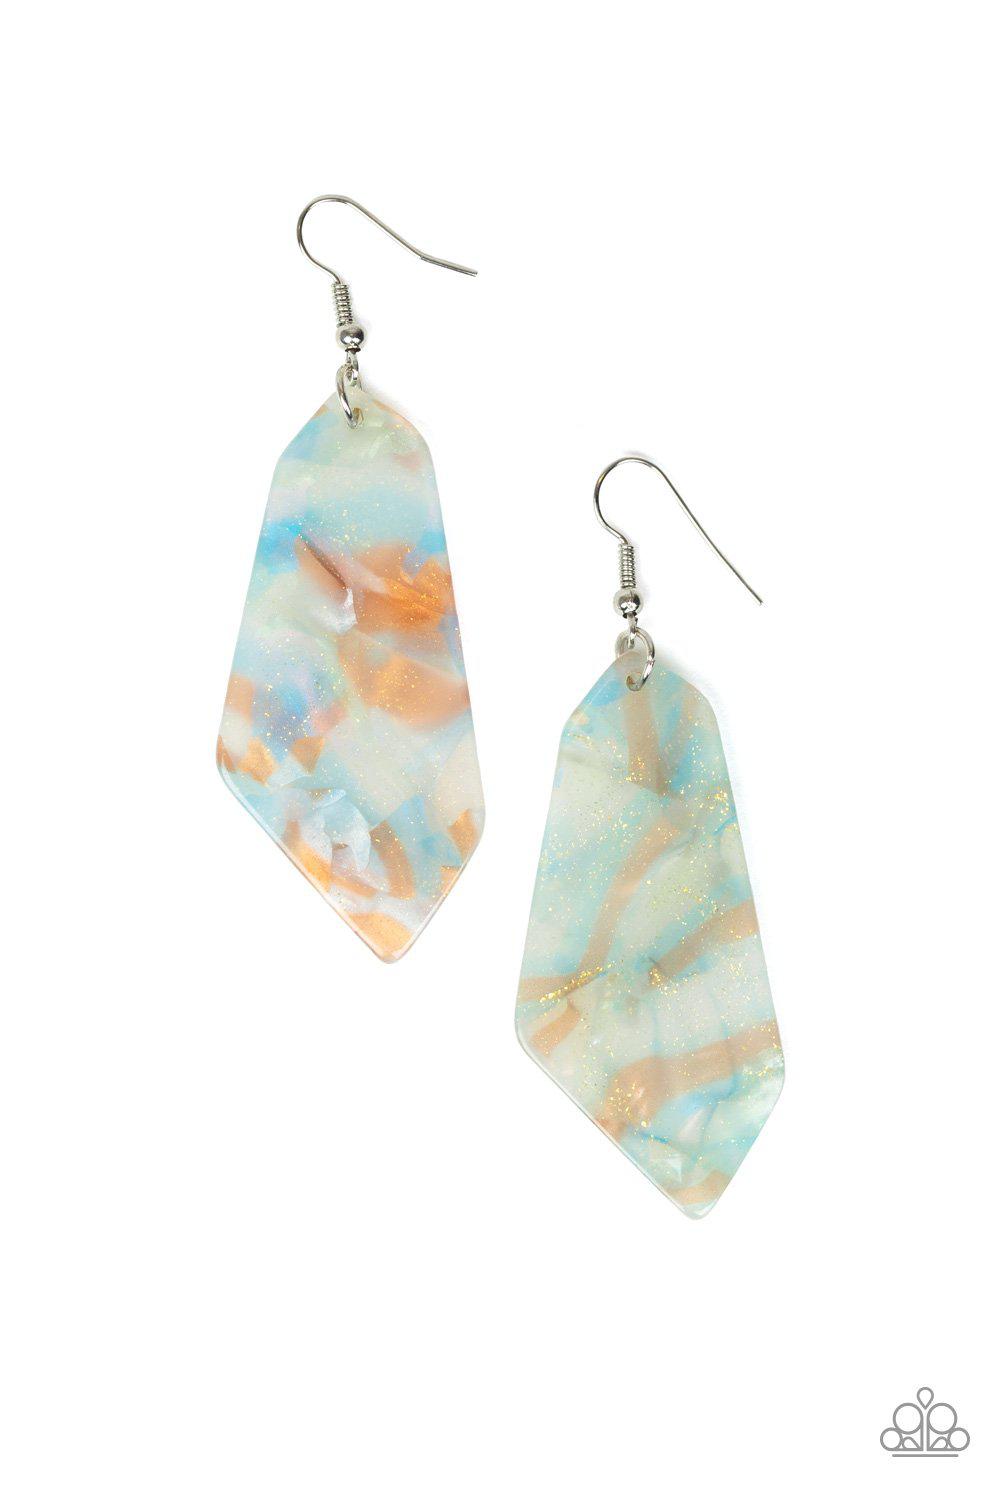 Walking On WATERCOLORS Blue Acrylic Earrings - Paparazzi Accessories-CarasShop.com - $5 Jewelry by Cara Jewels